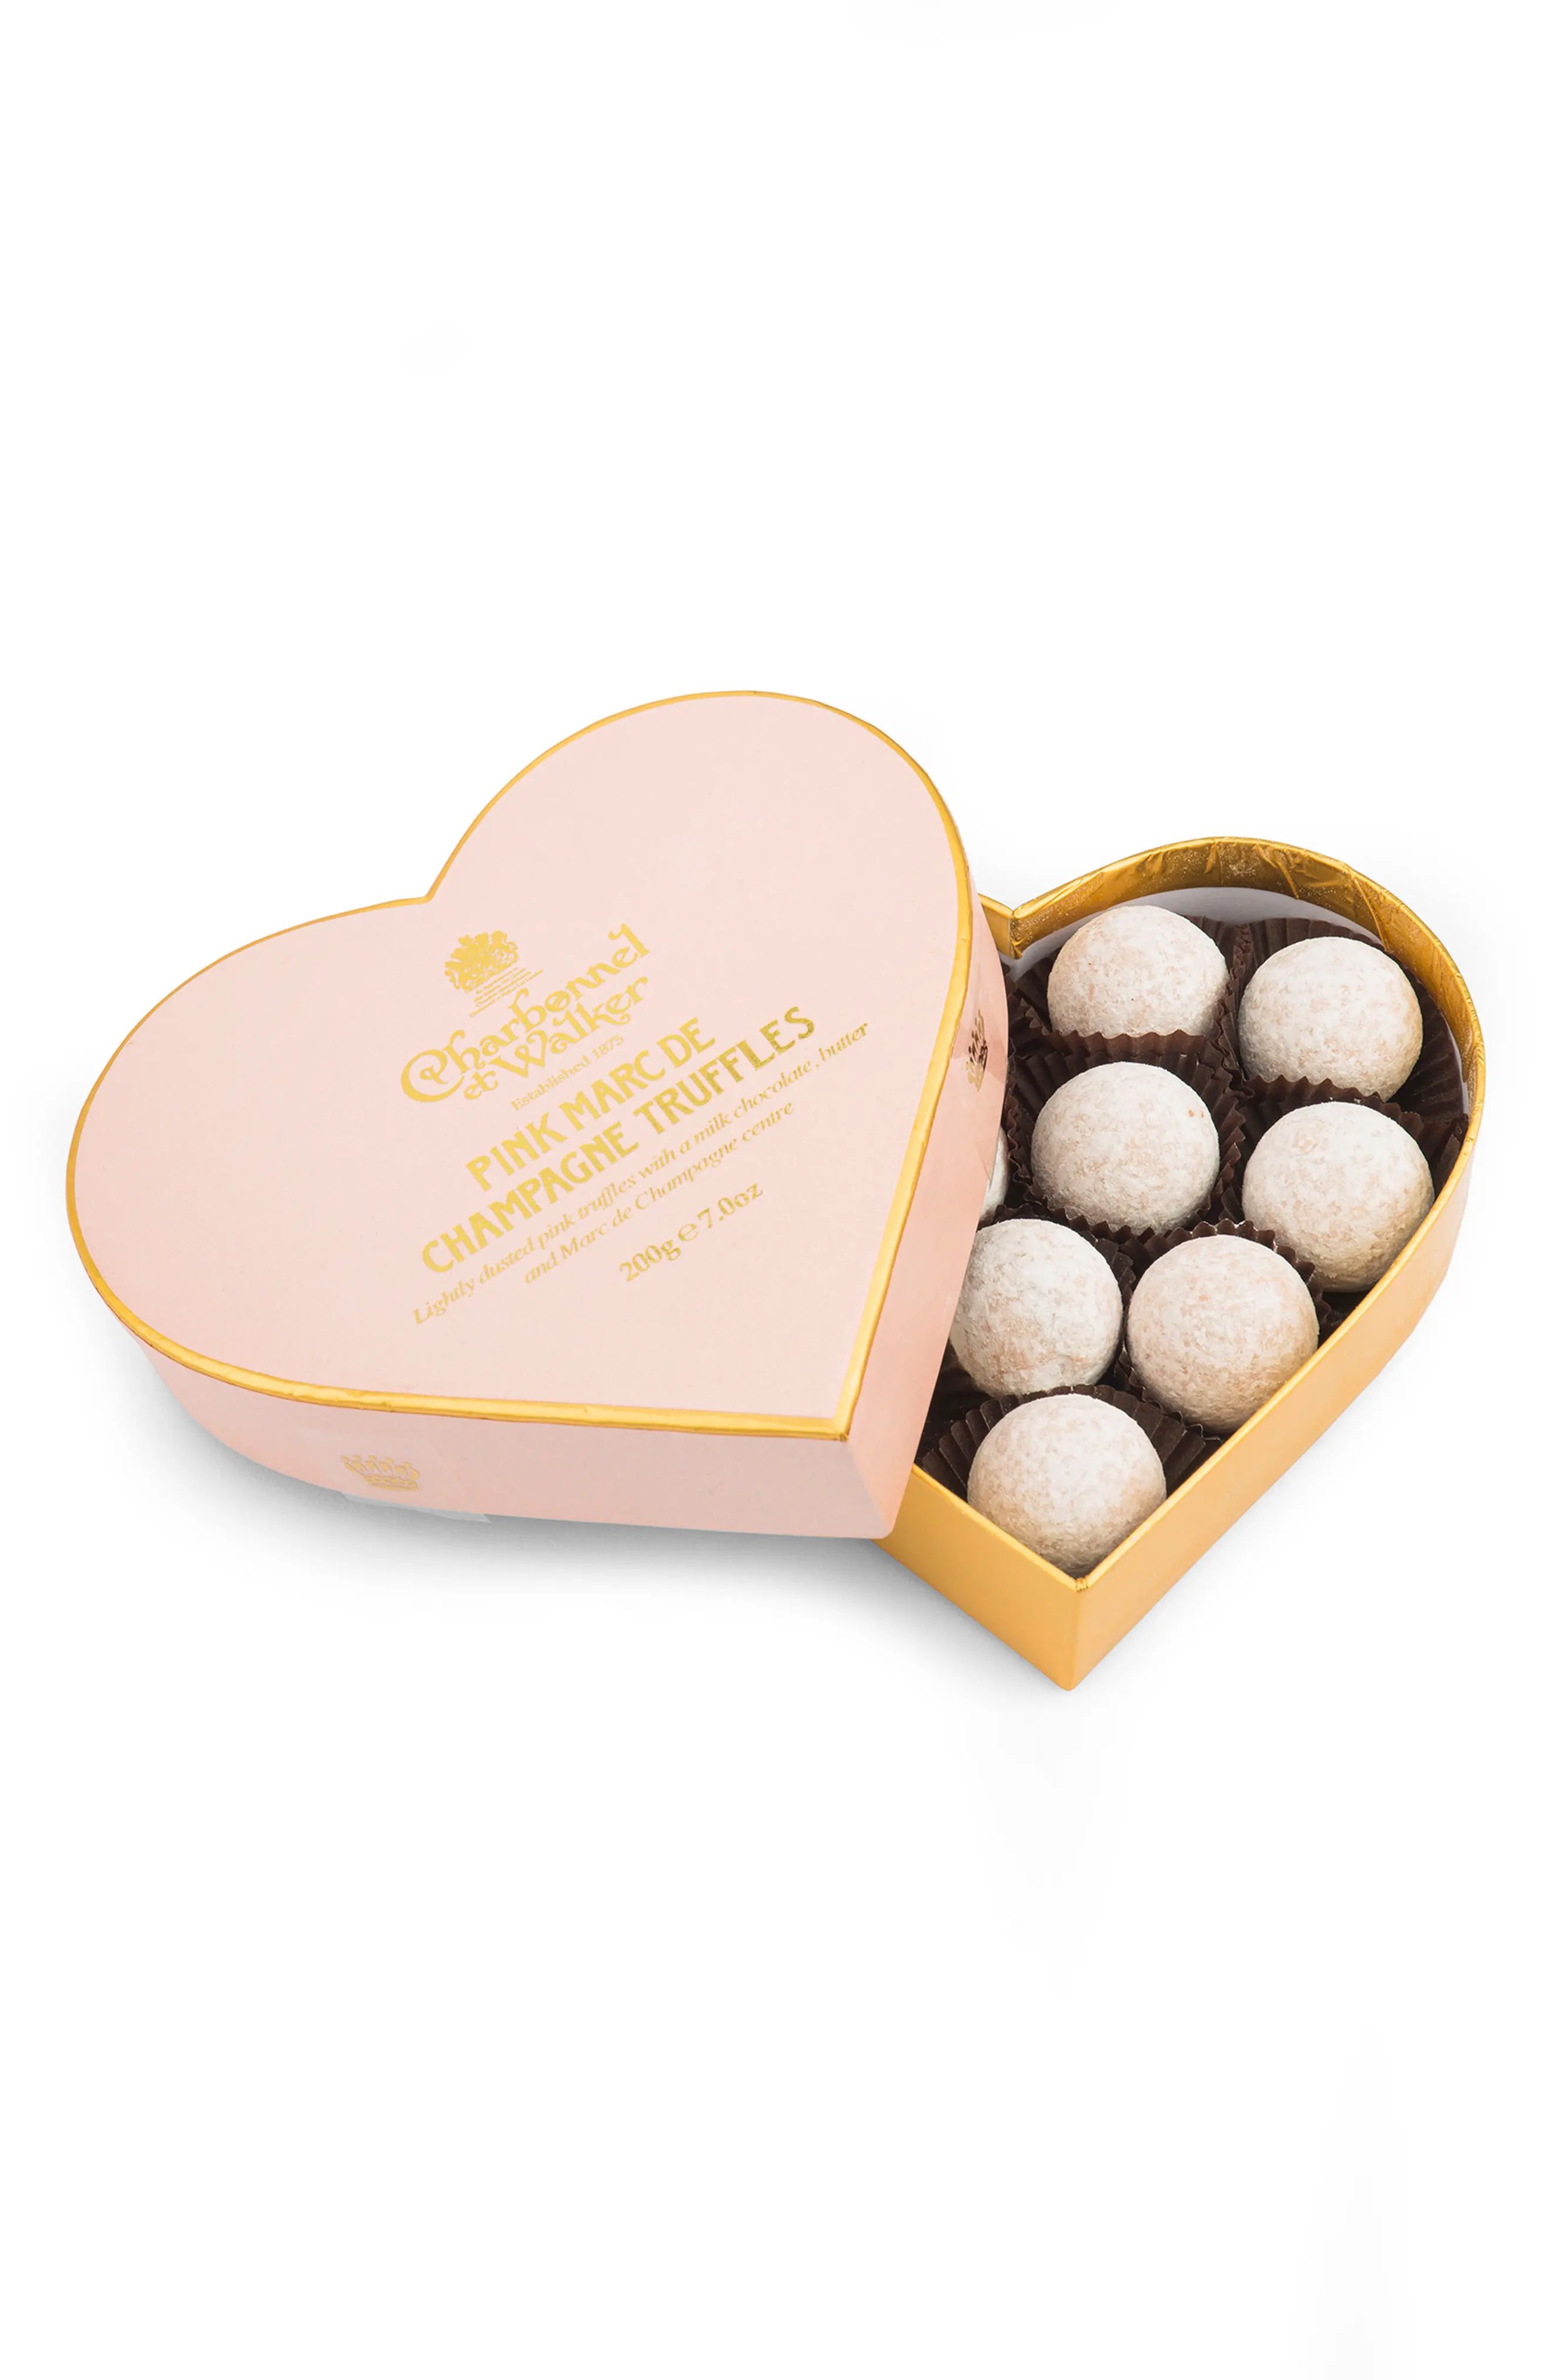 Chocolate Truffles in Heart Shaped Gift Box | Nordstrom